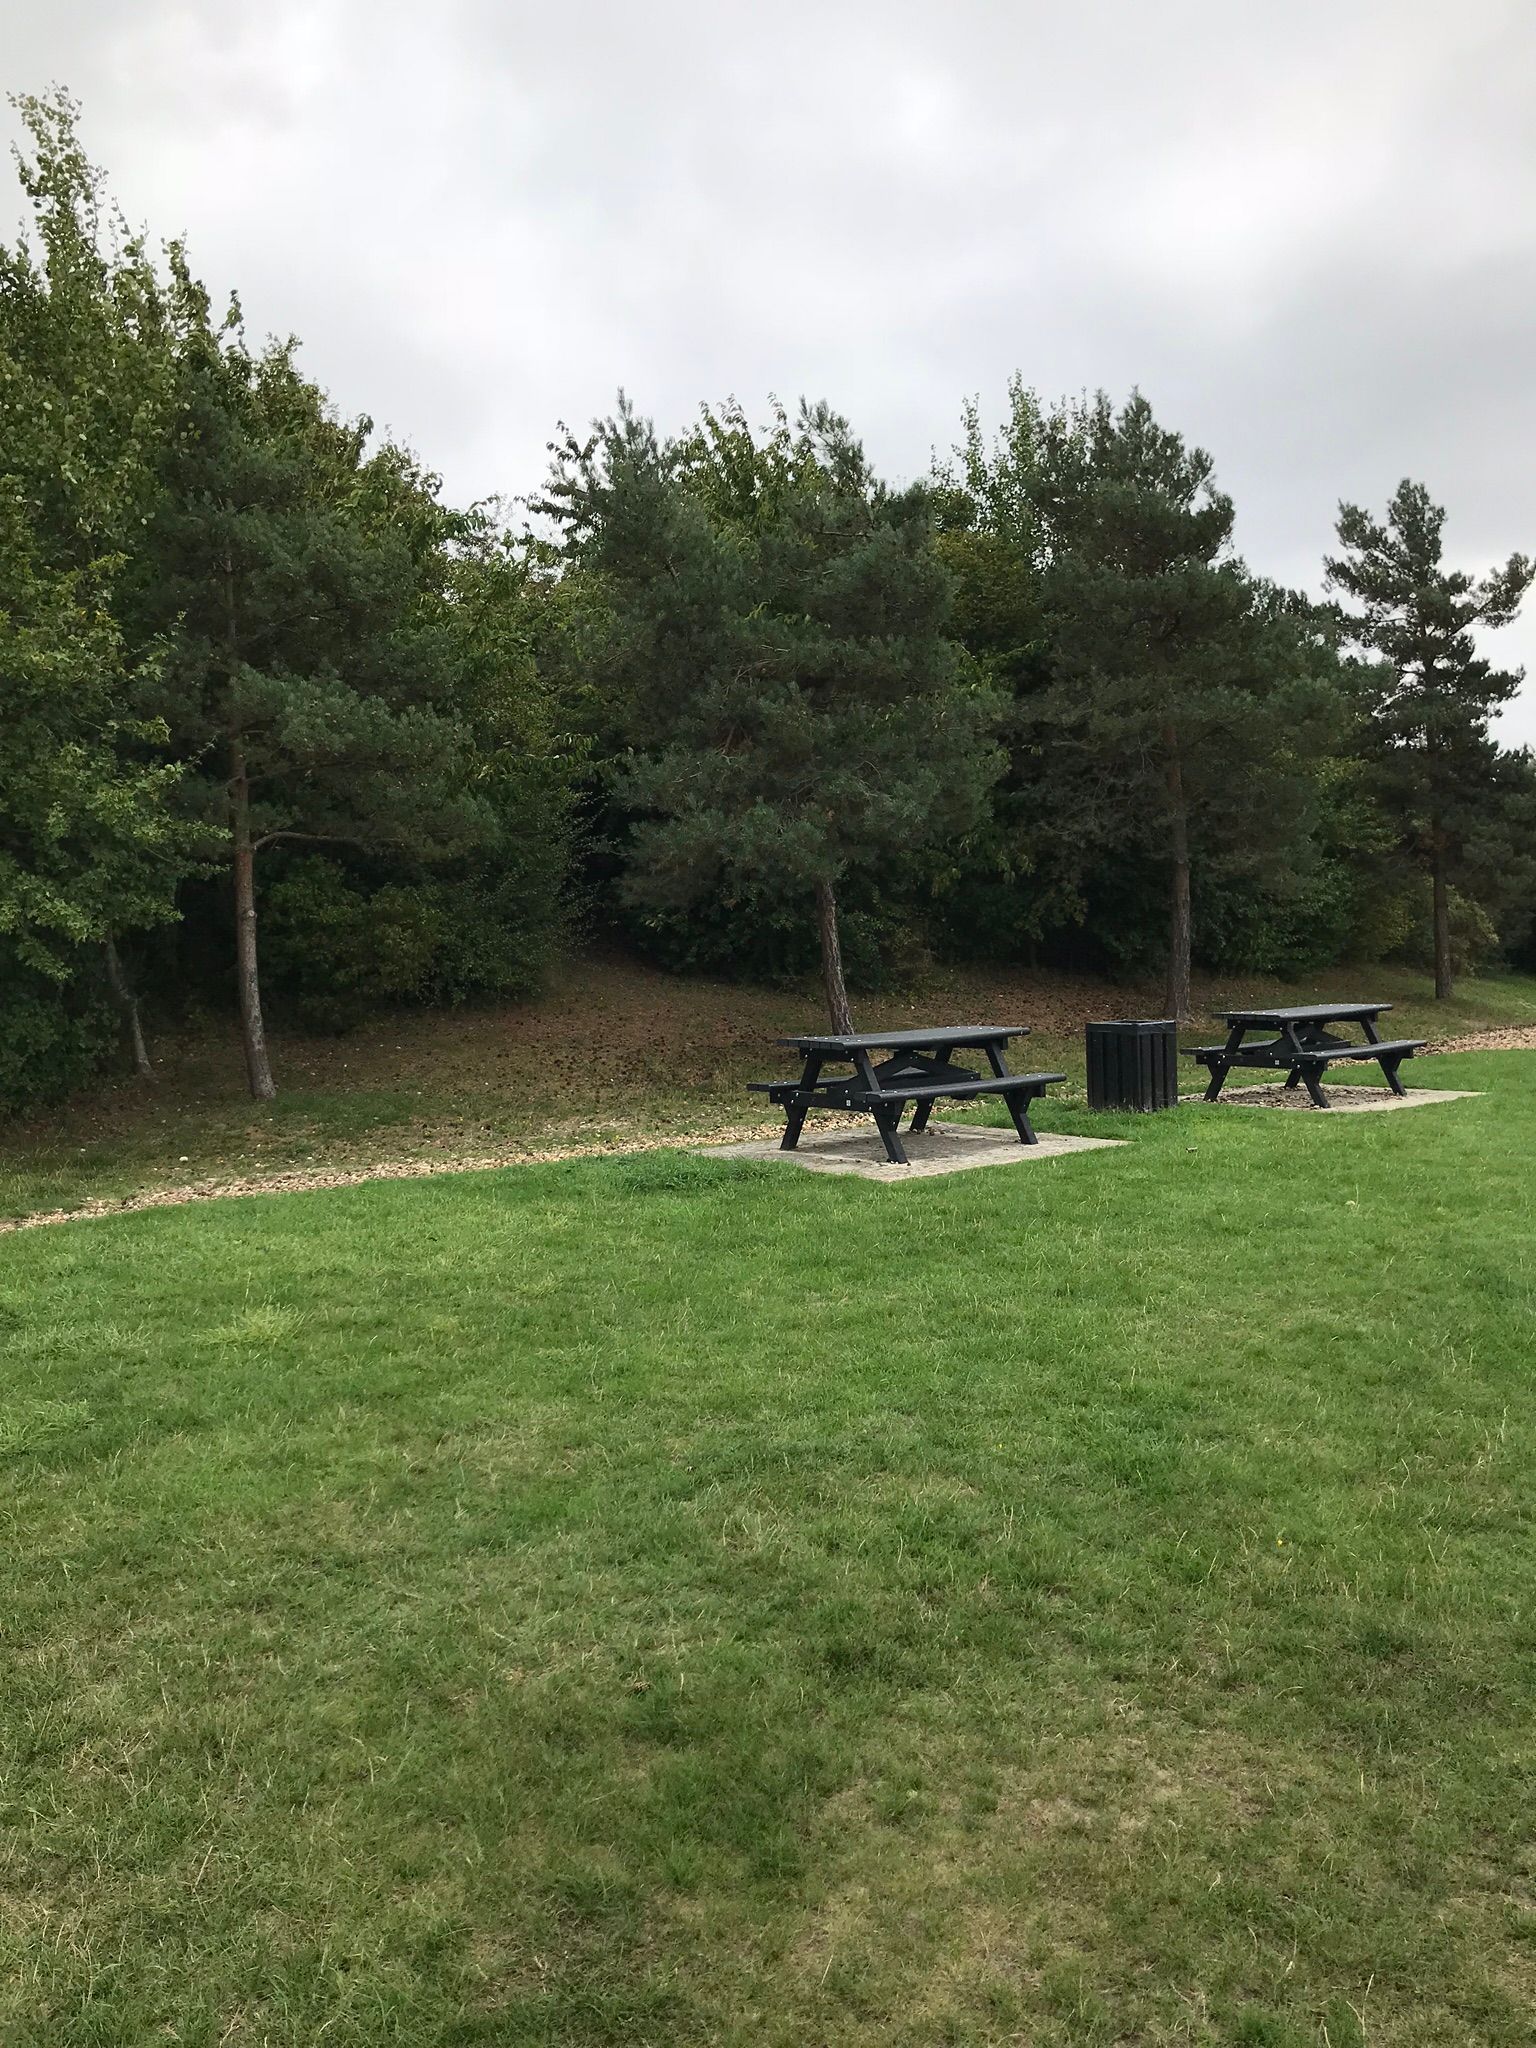 Picnic benches in the park-land around Shark Park